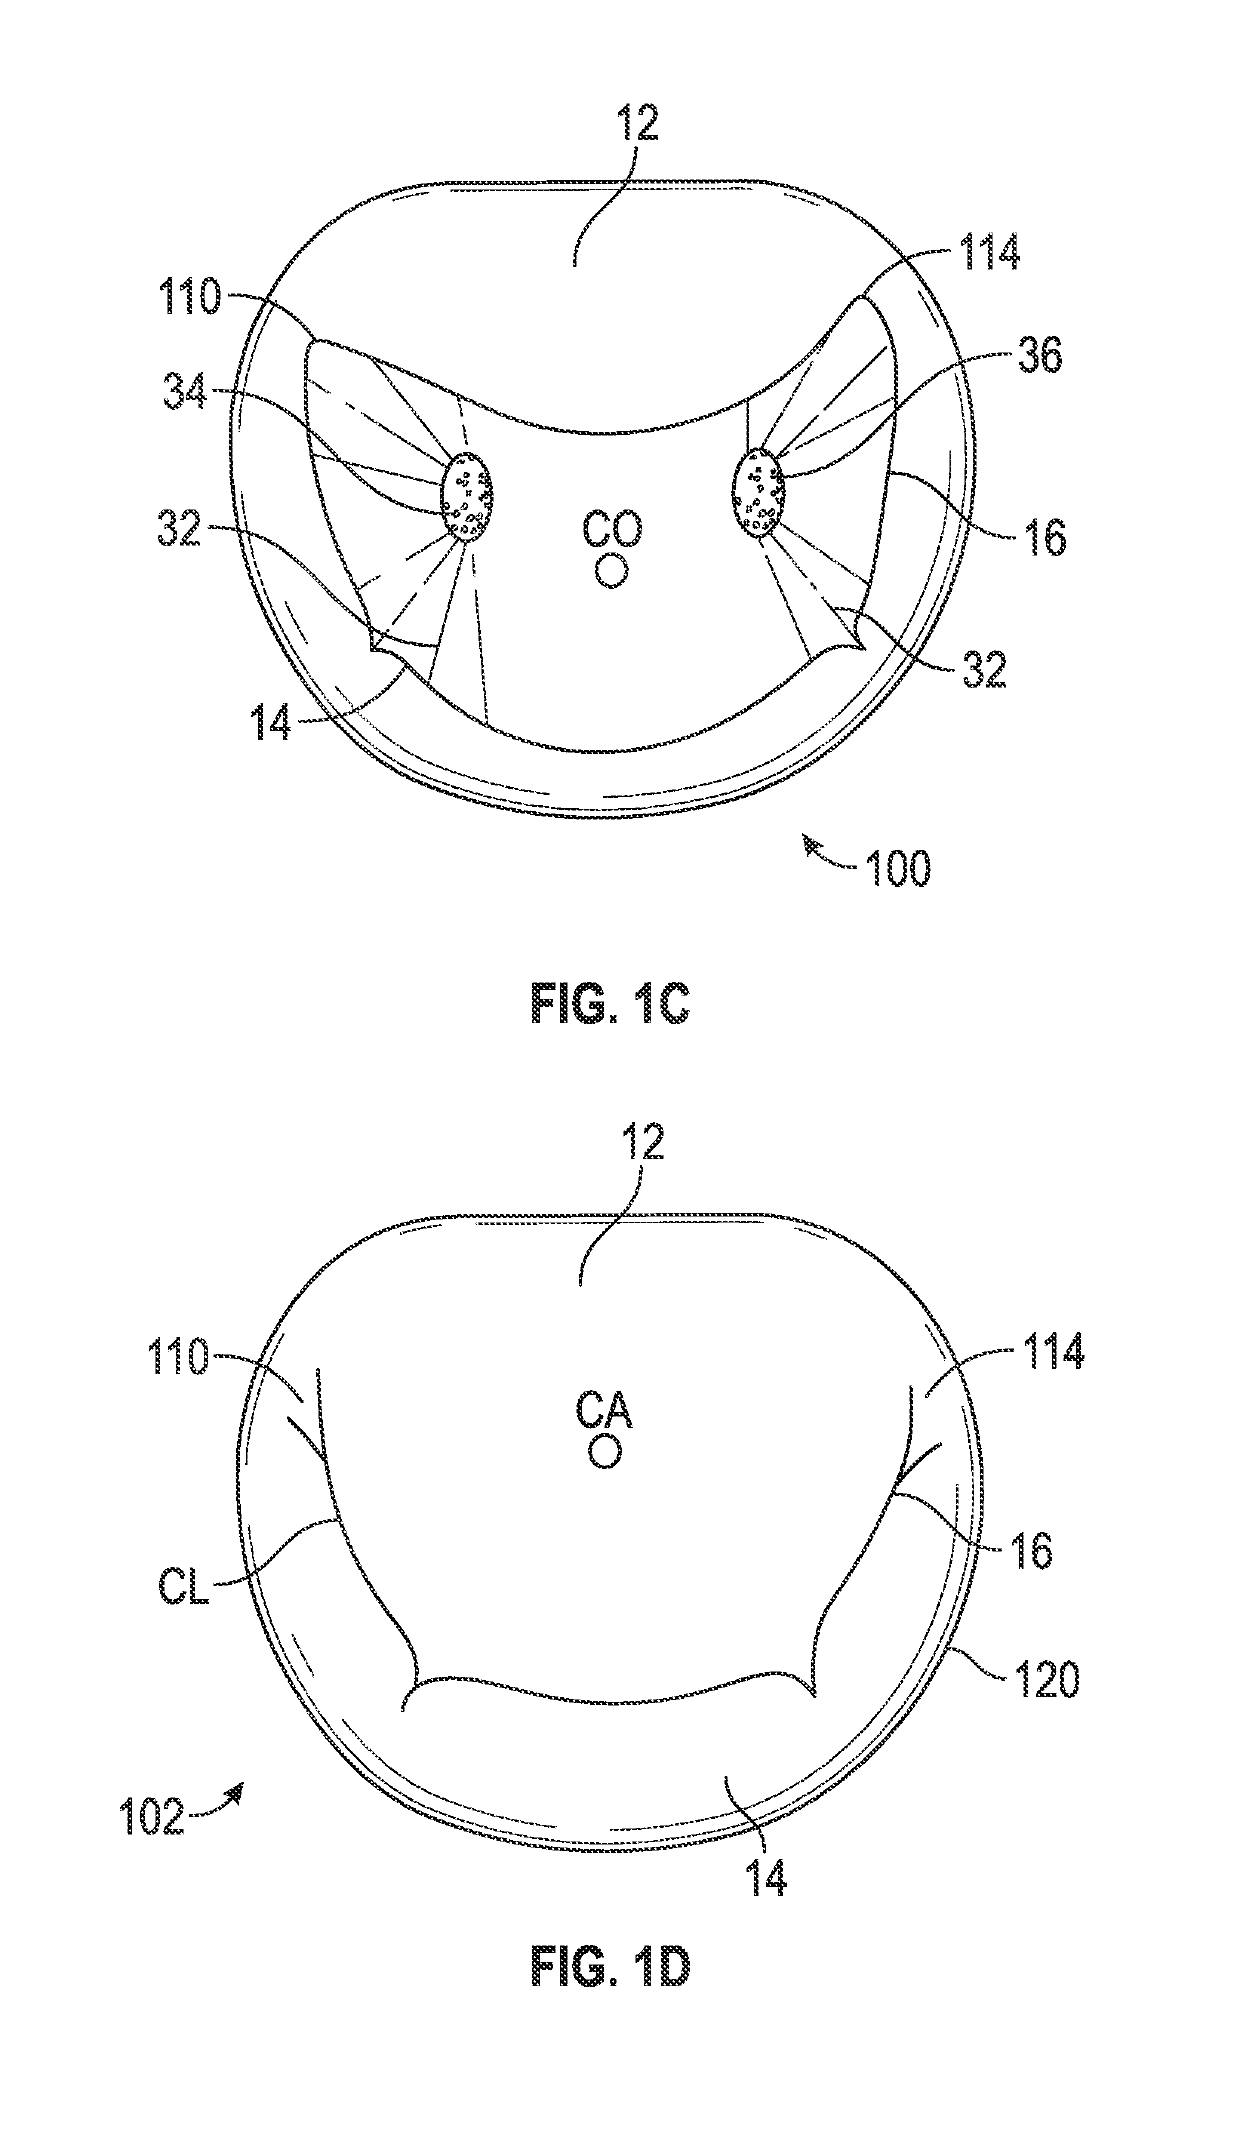 Systems and methods for anchoring an implant